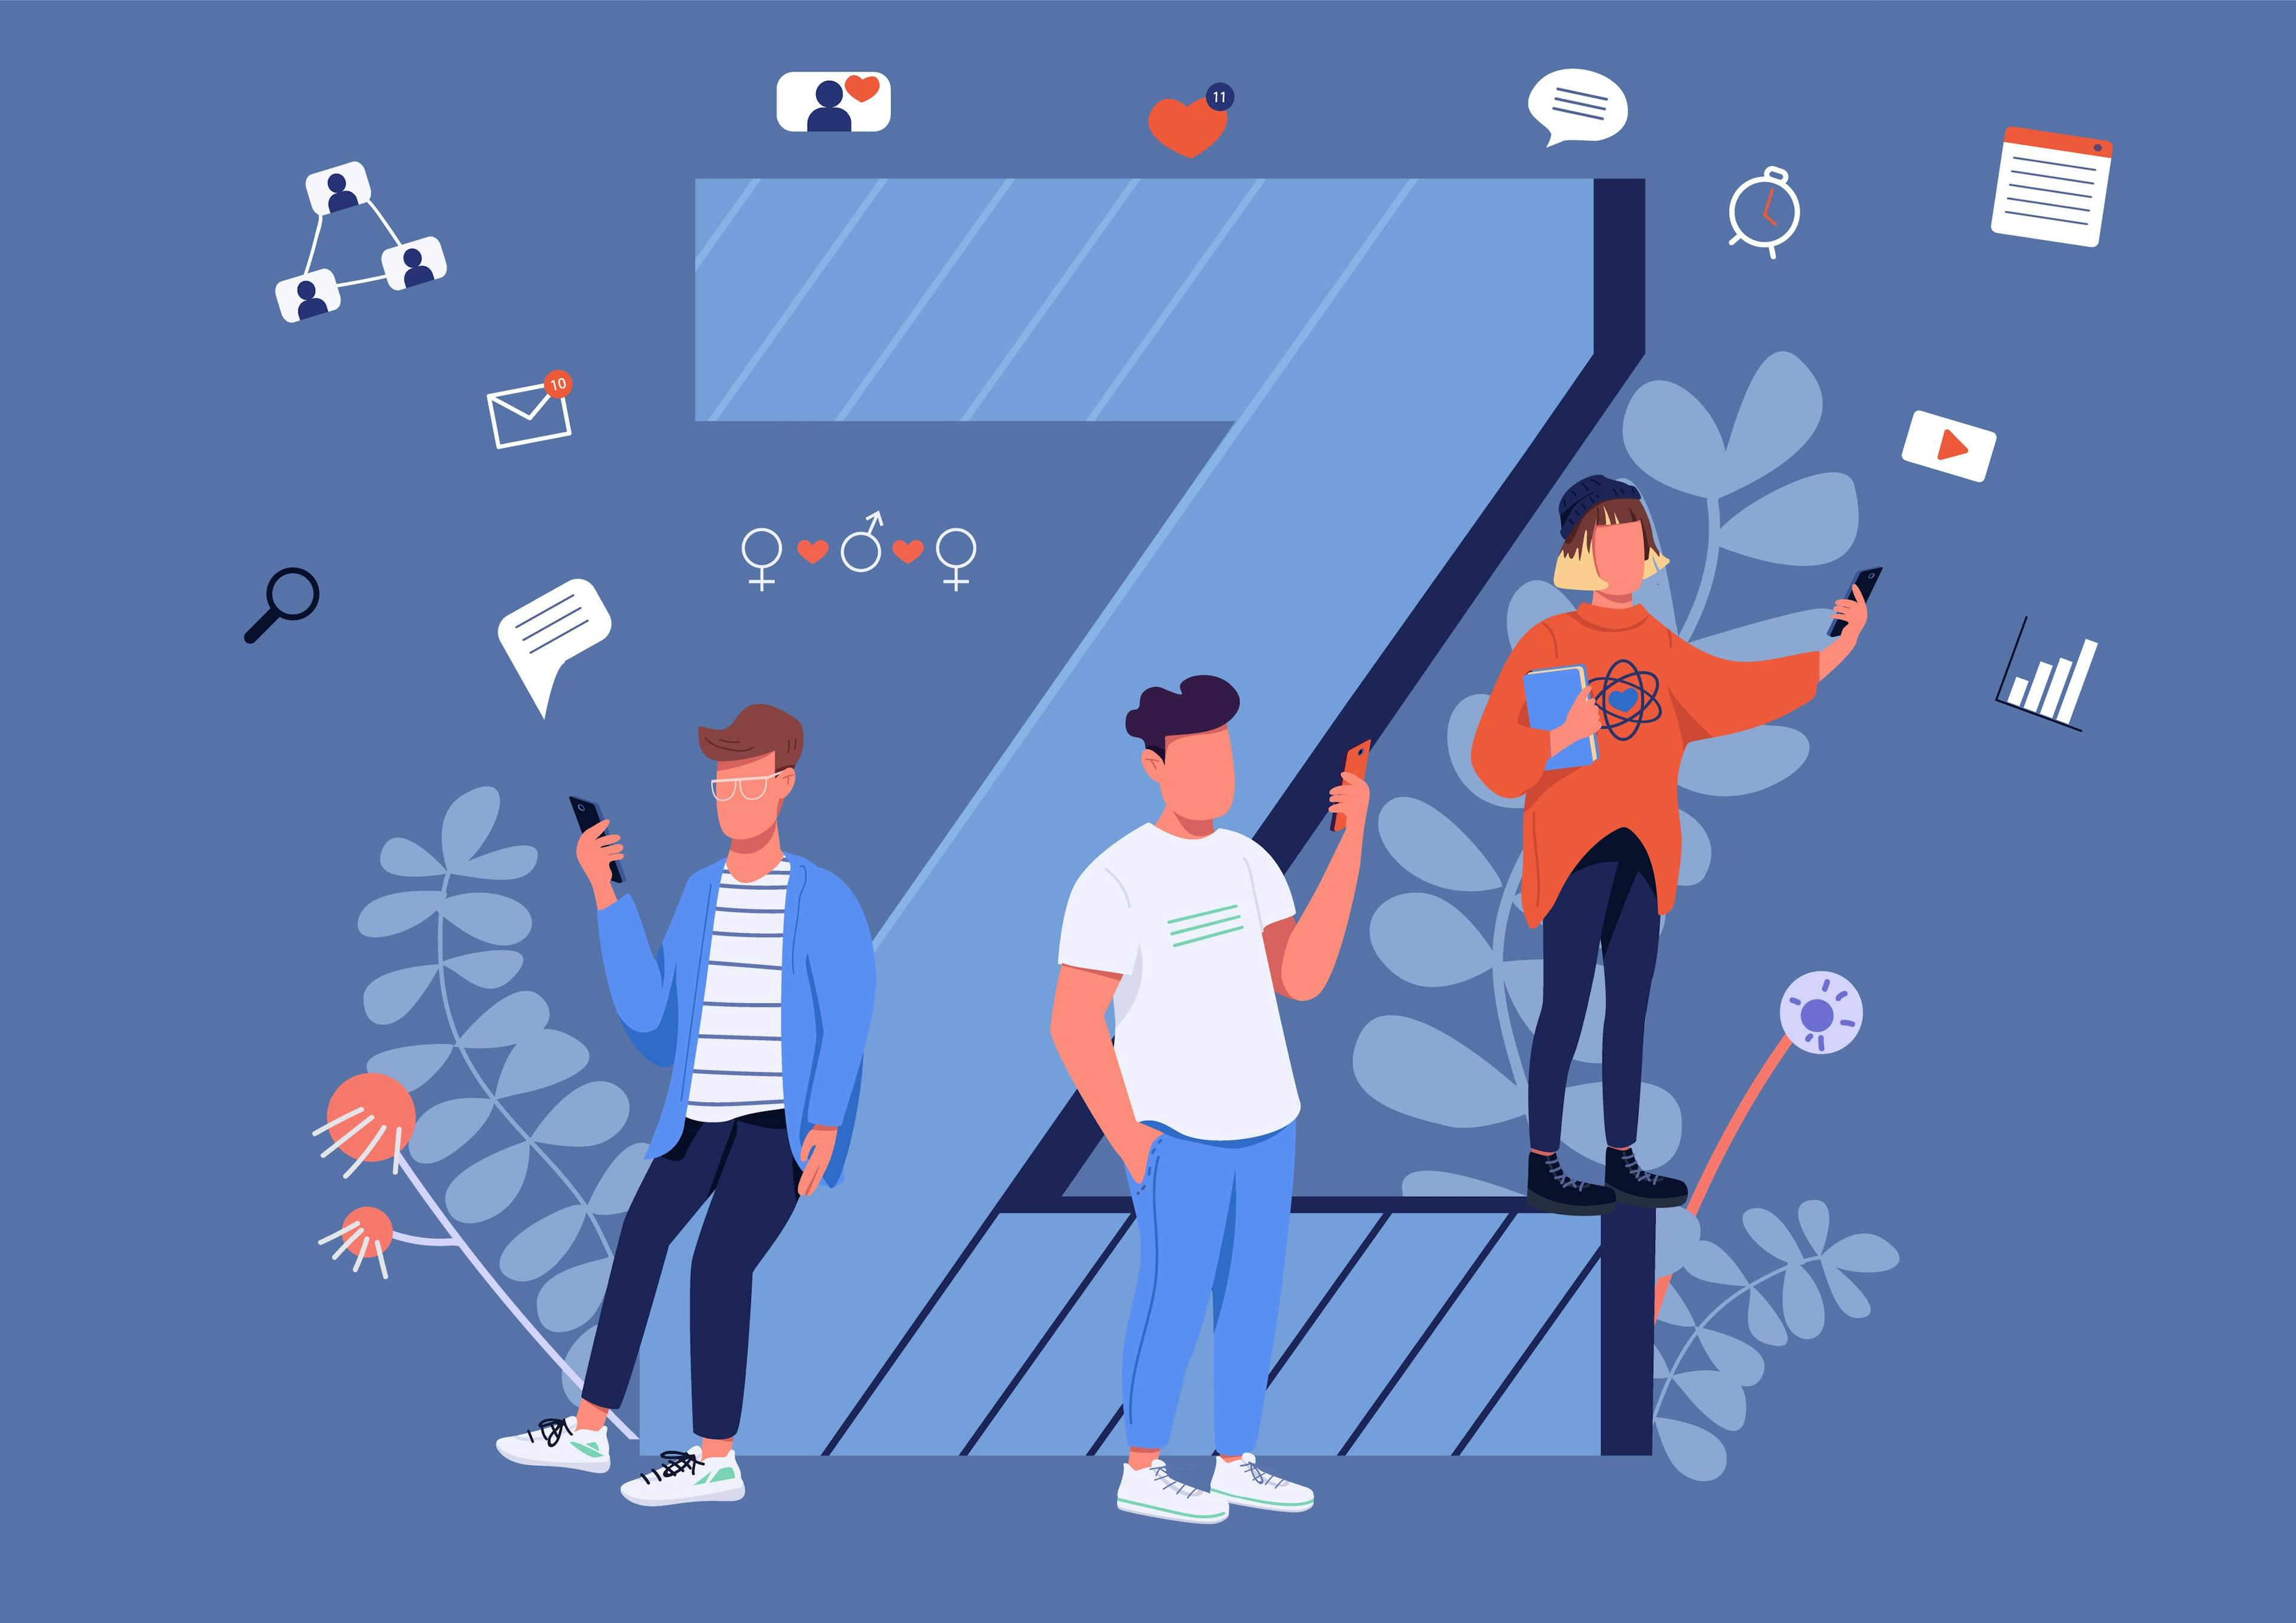 Gen Z is the fastest growing generation in the workforce. Image Credit: Adobe Stock - The img